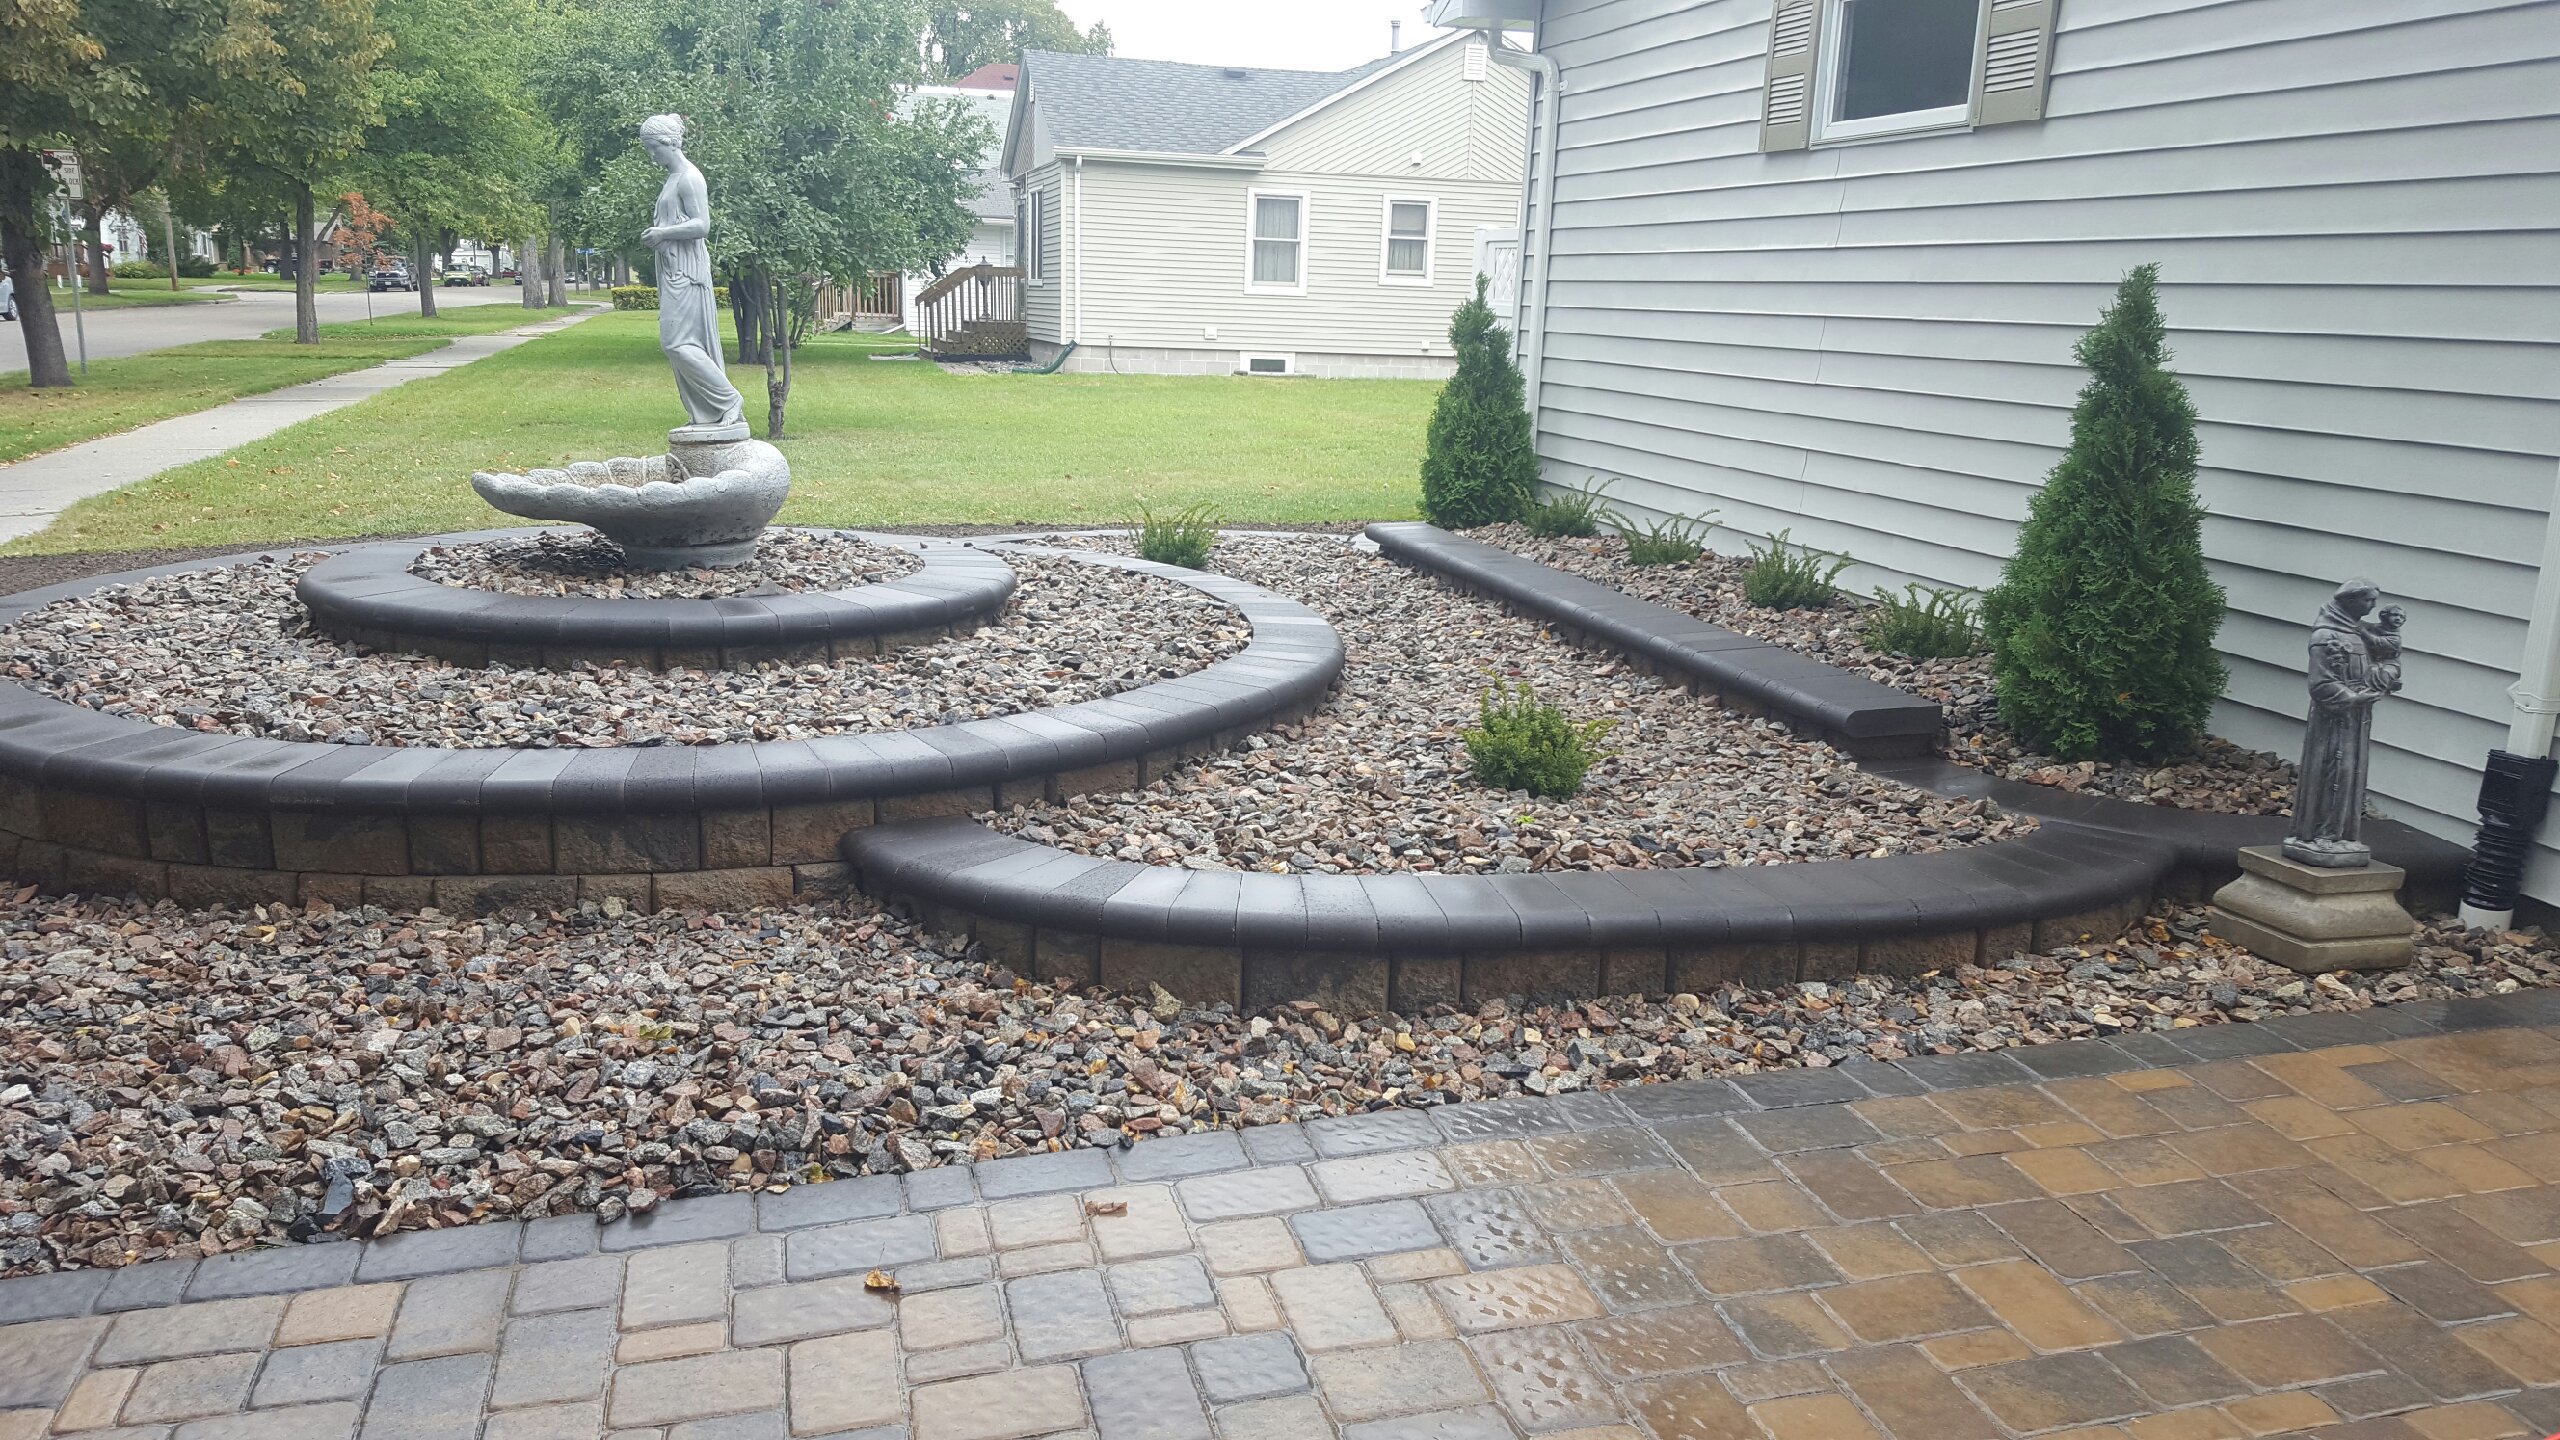 R&R Landscaping Photo